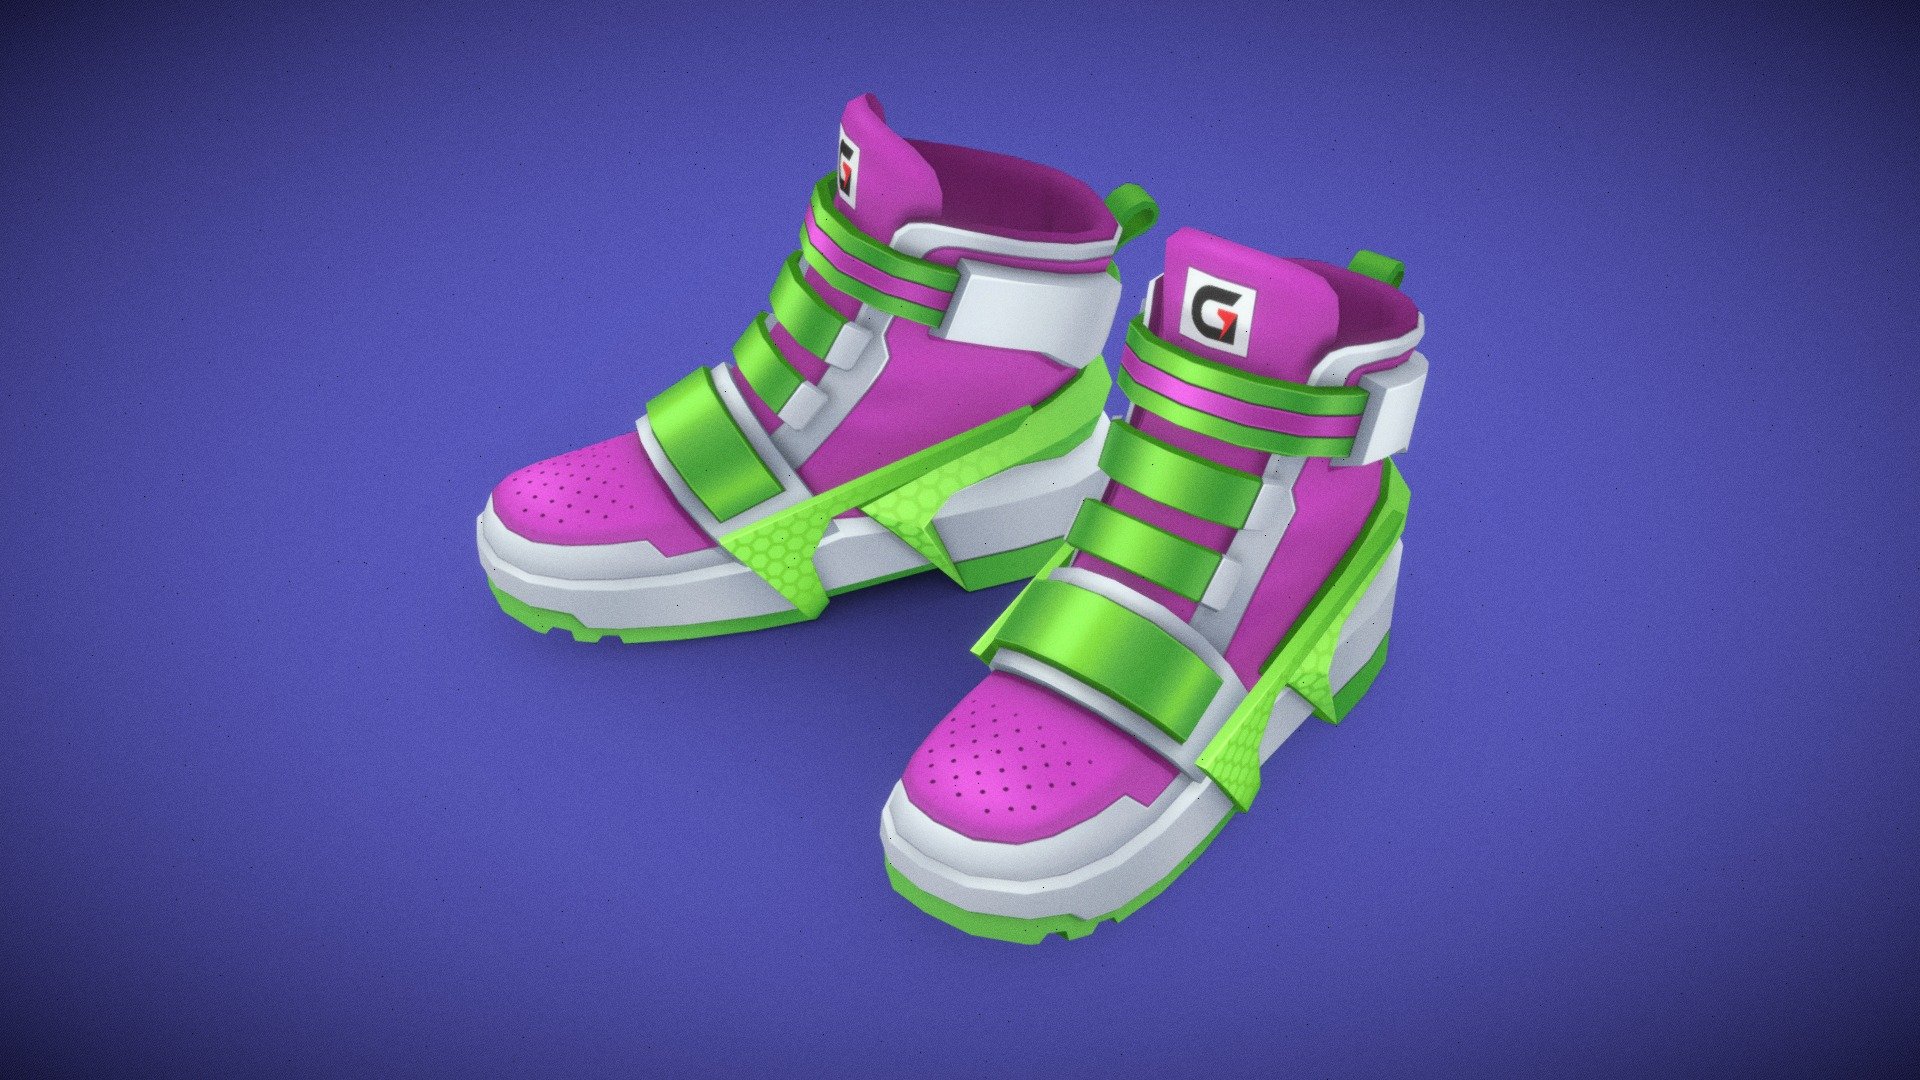 Newproject Idol by team Gianty - Shoes 3D by Gianty - 3D model by GIANTY 3d model